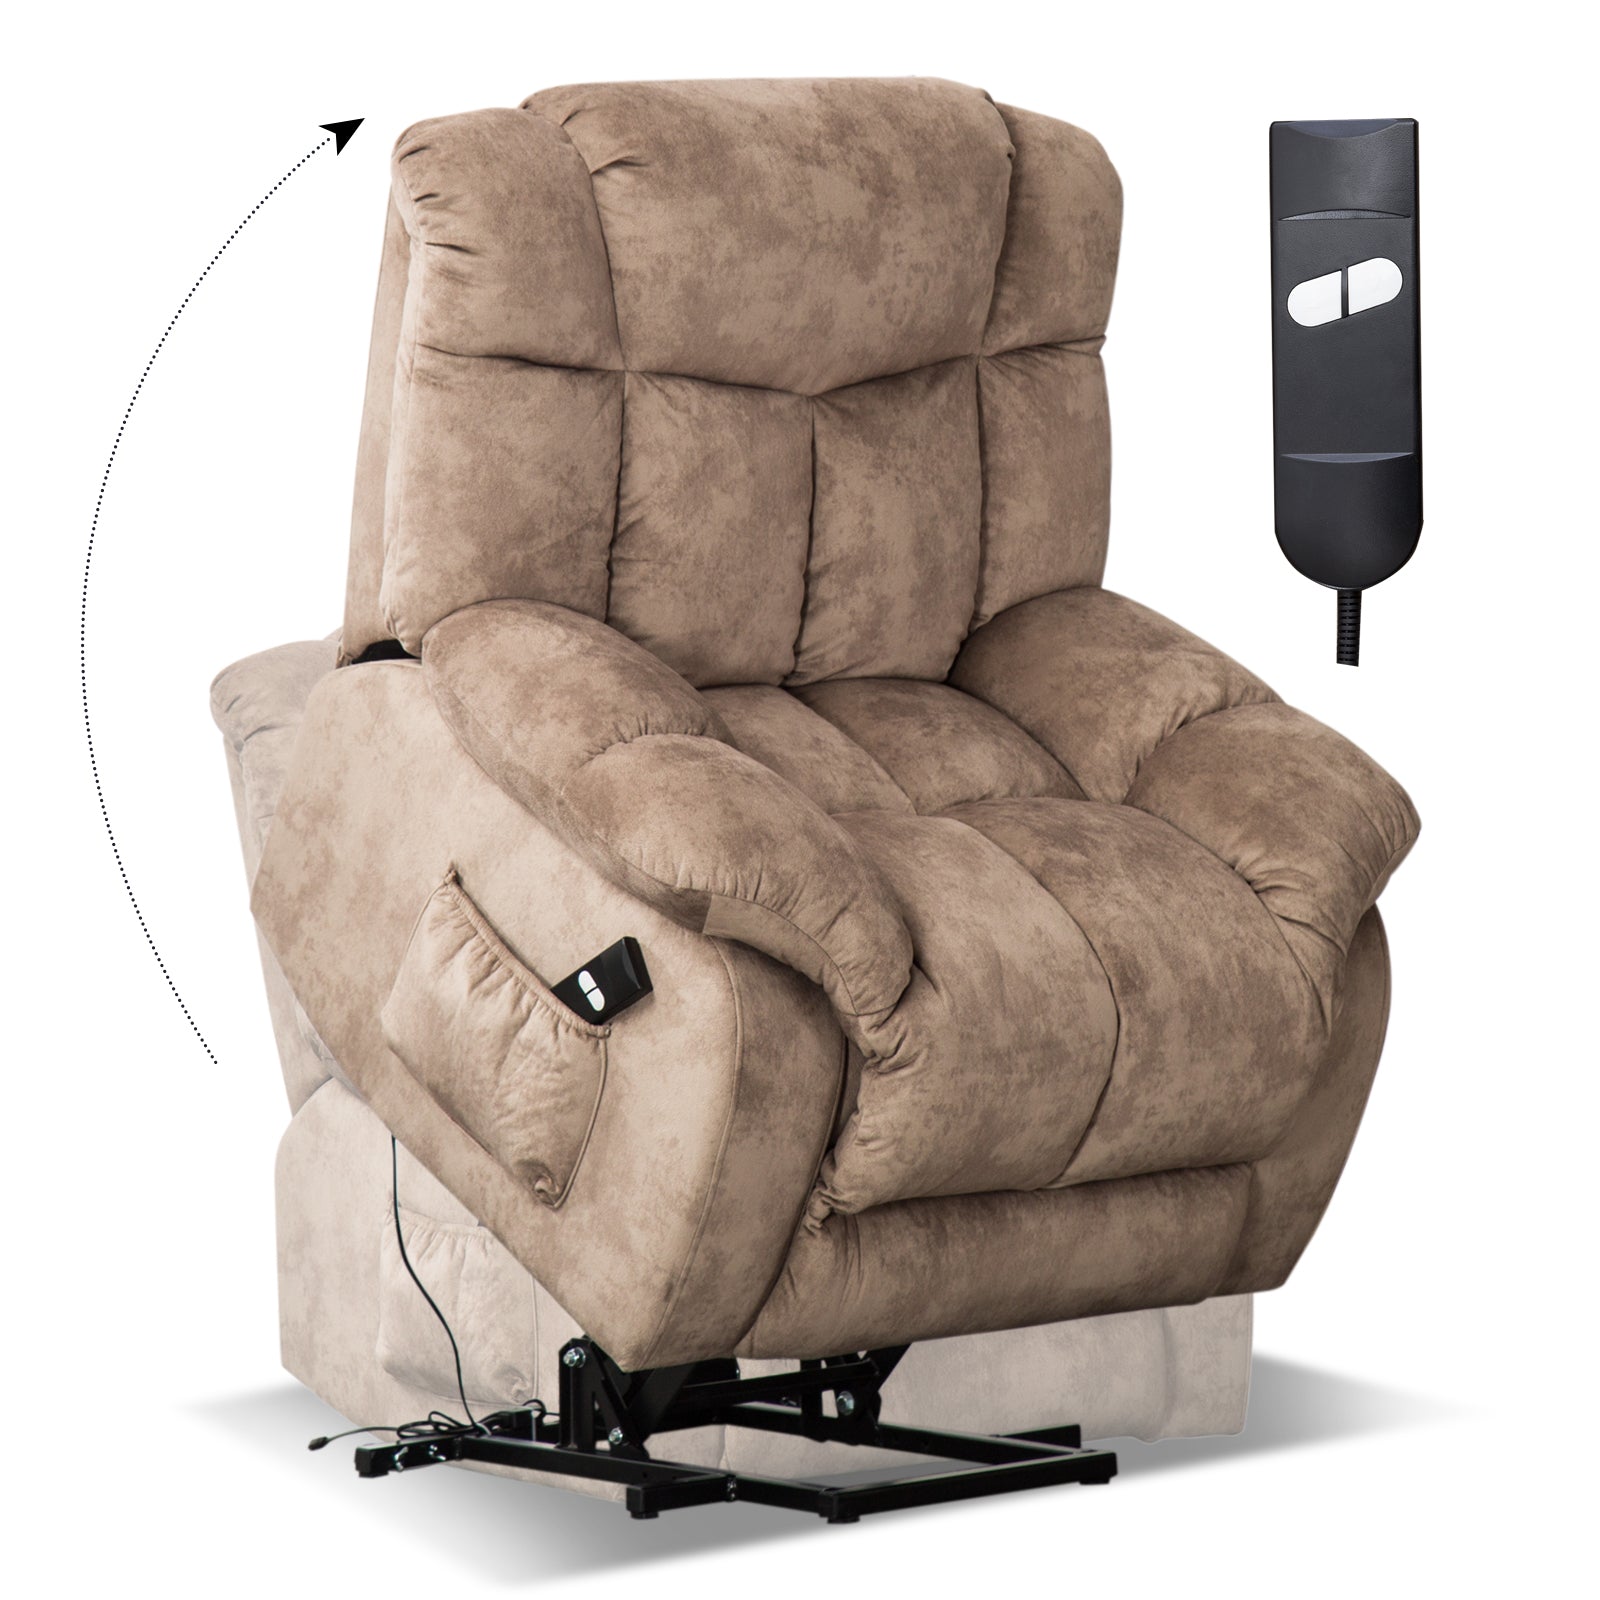 Fayette Power Recliner Chair, Lift Recliner, Electric Recliner Chairs, Lift Chairs Recliners for Elderly with Footrest by Naomi Home Color Mocha